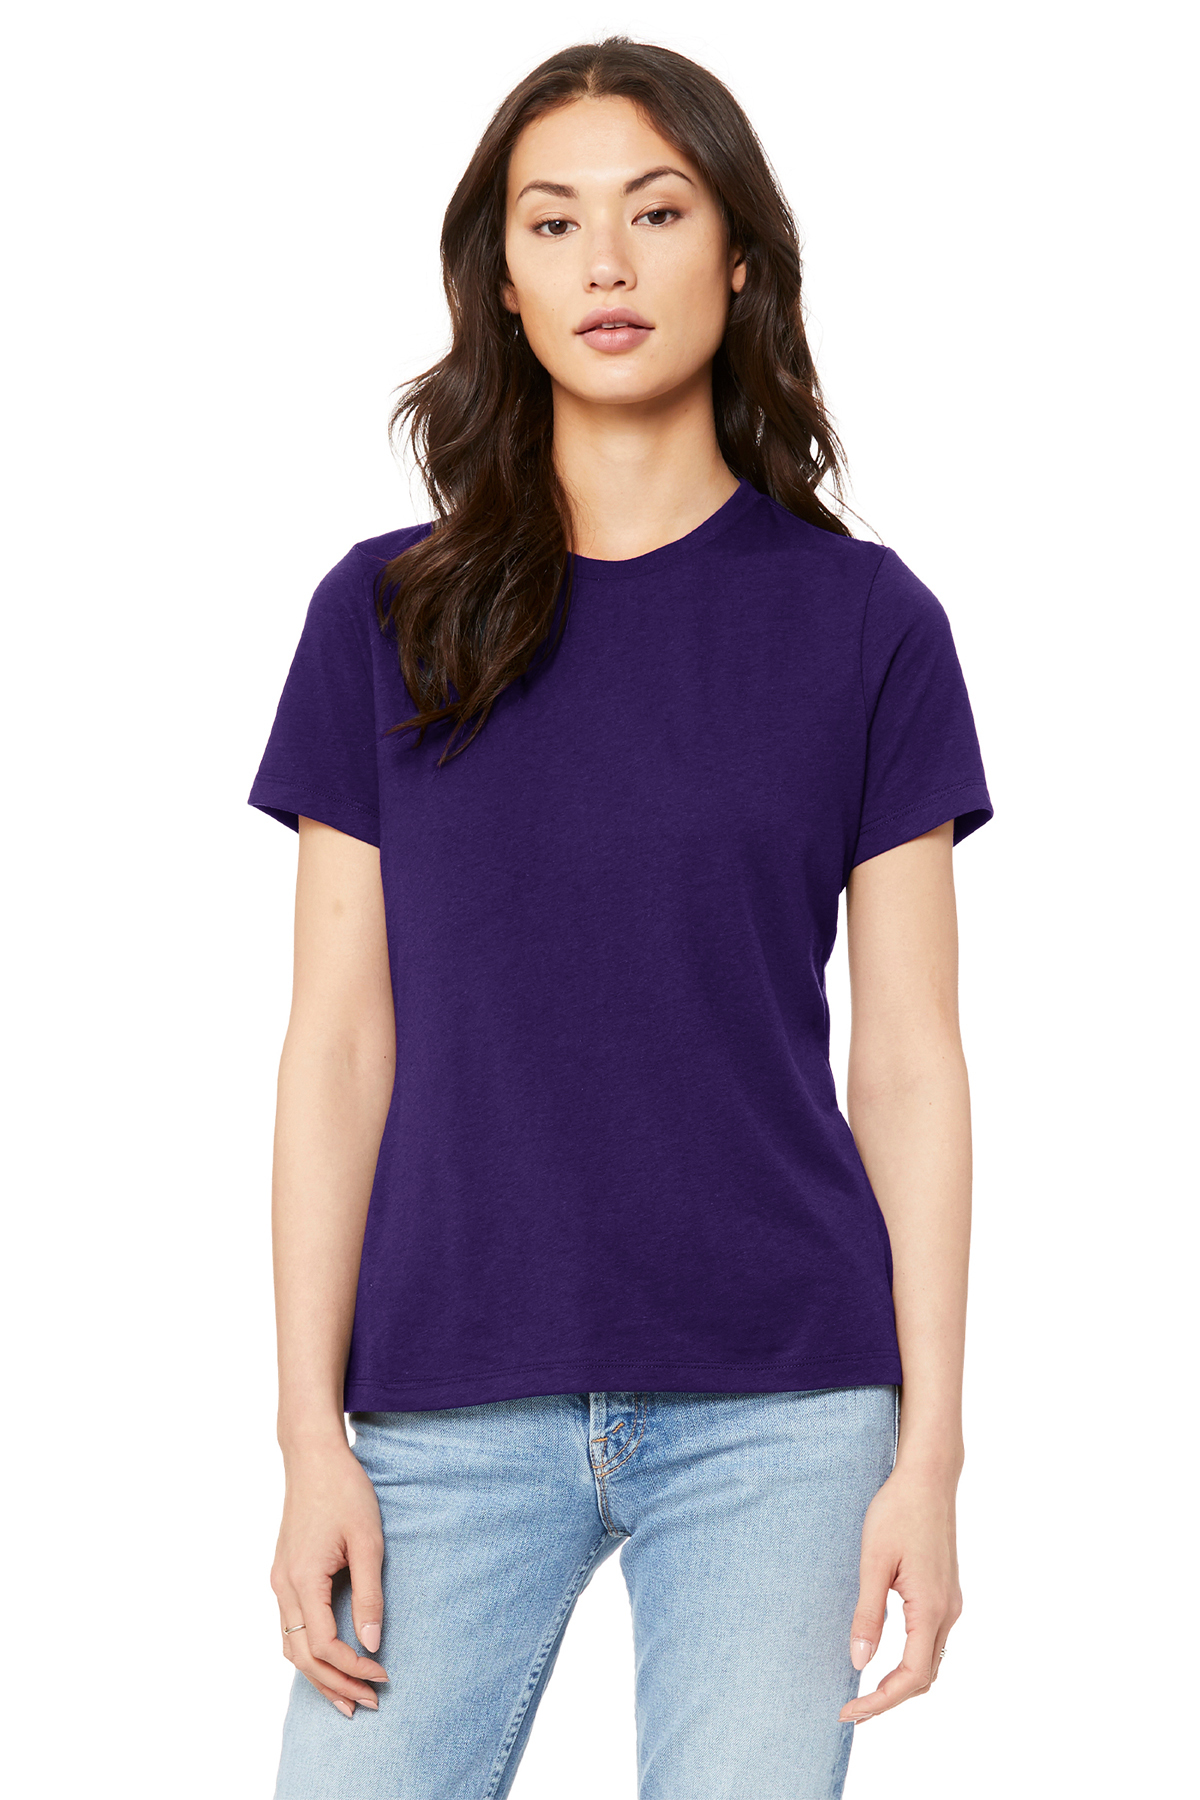 BELLA+CANVAS Women’s Relaxed Jersey Short Sleeve Tee | Product | SanMar